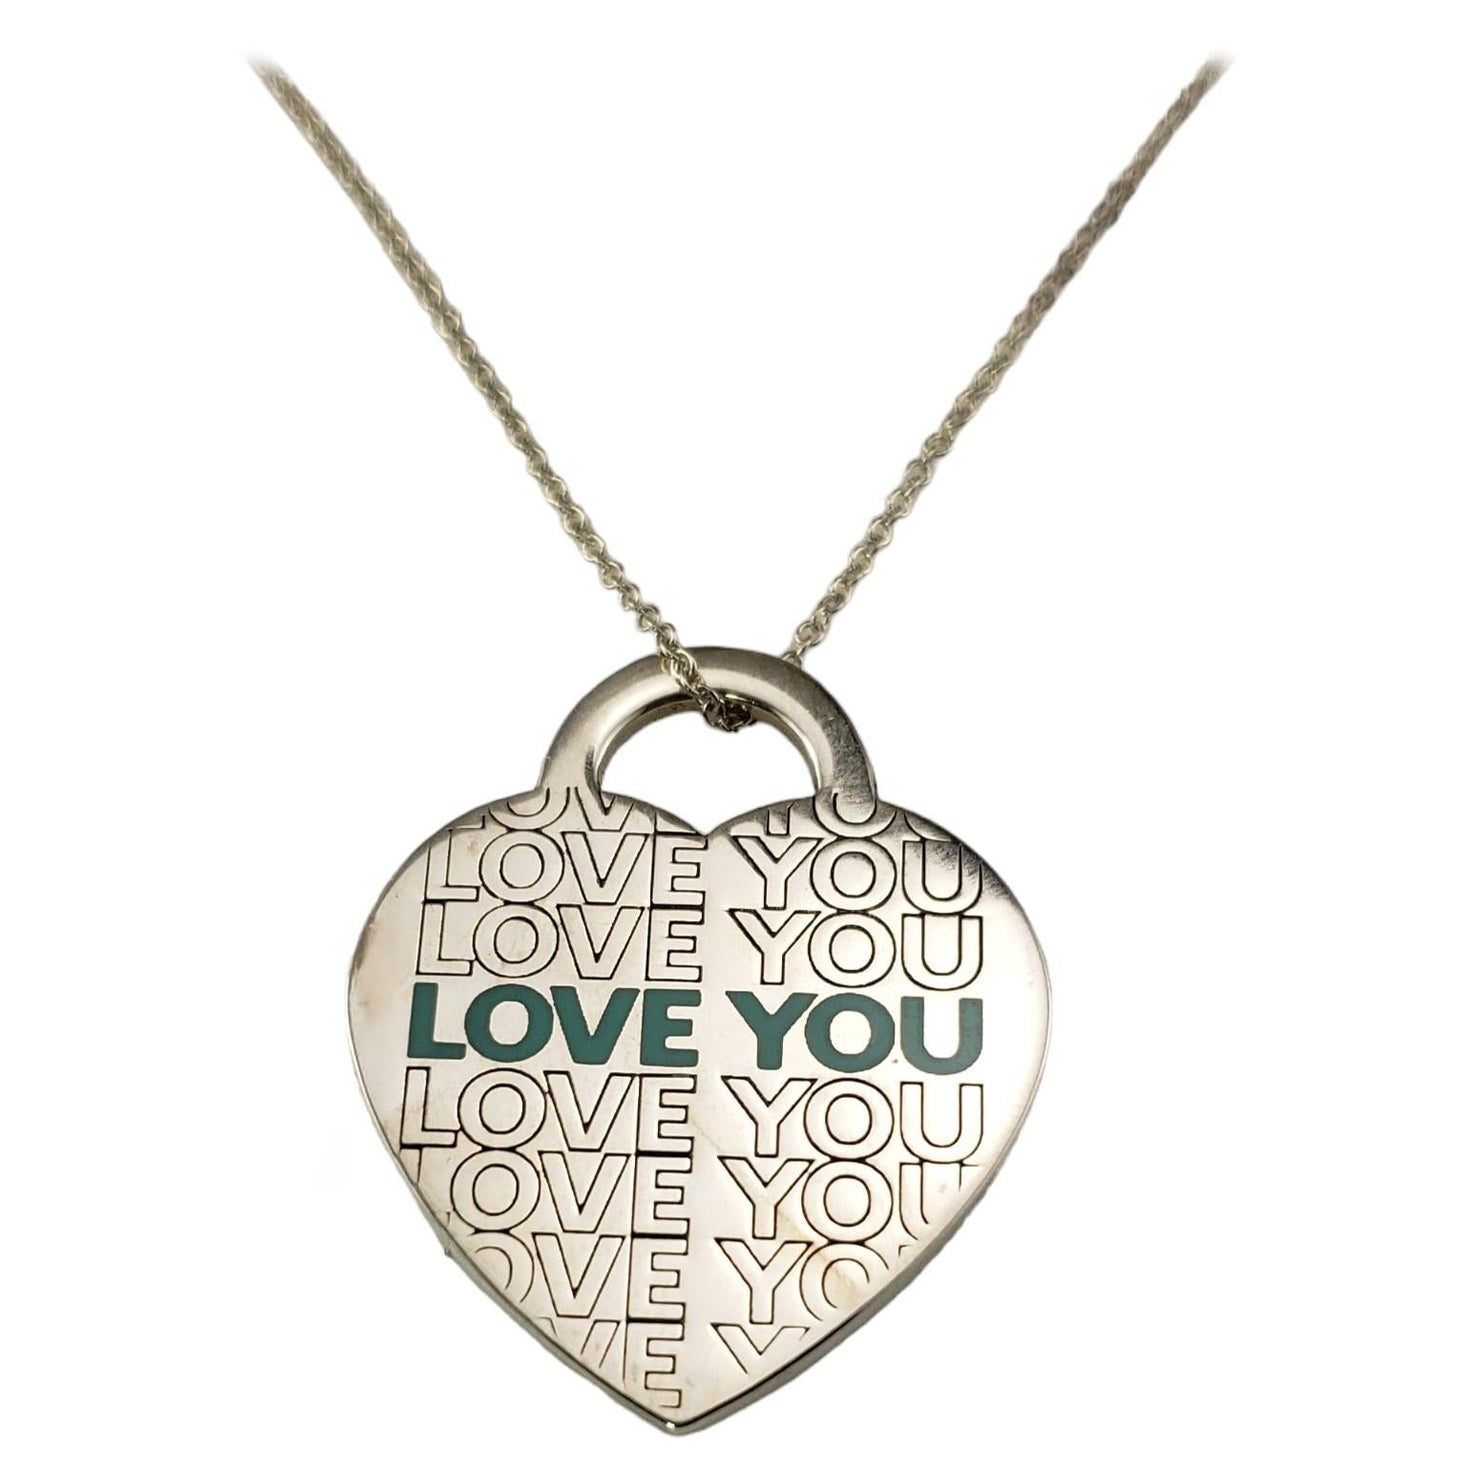 Tiffany & Co. Sterling Silver "Love You" Heart Pendant Necklace Box #17084 For Sale